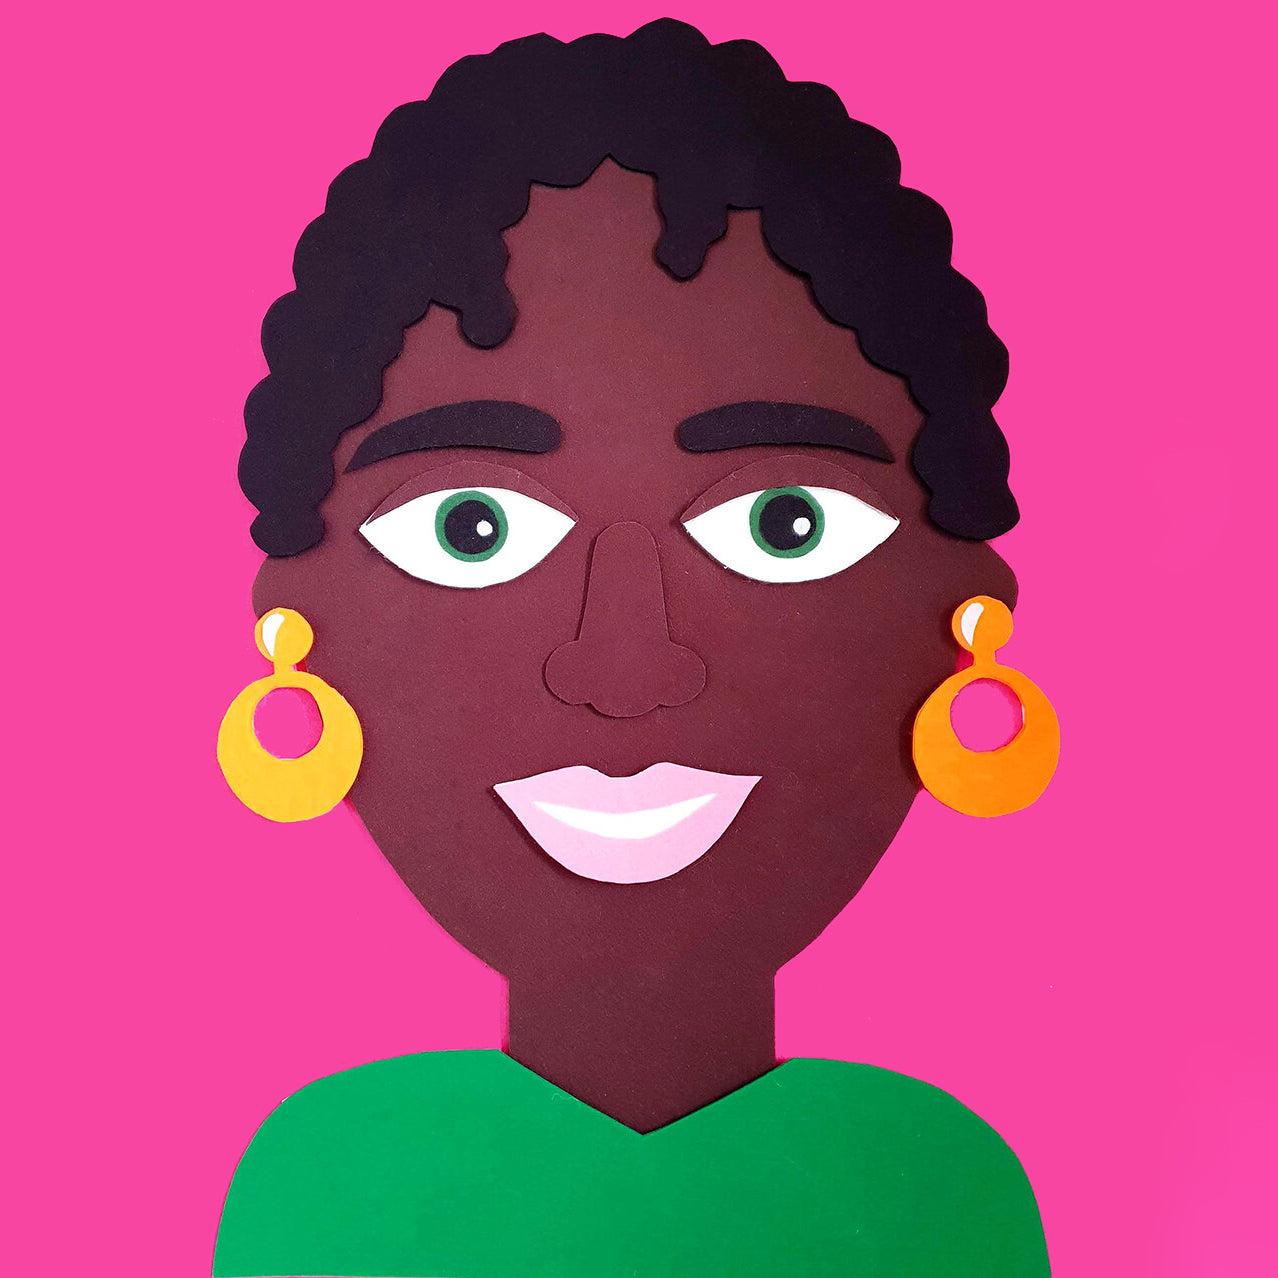 A felt collage illustration of a brown woman with short black natural hair, on a magenta background.